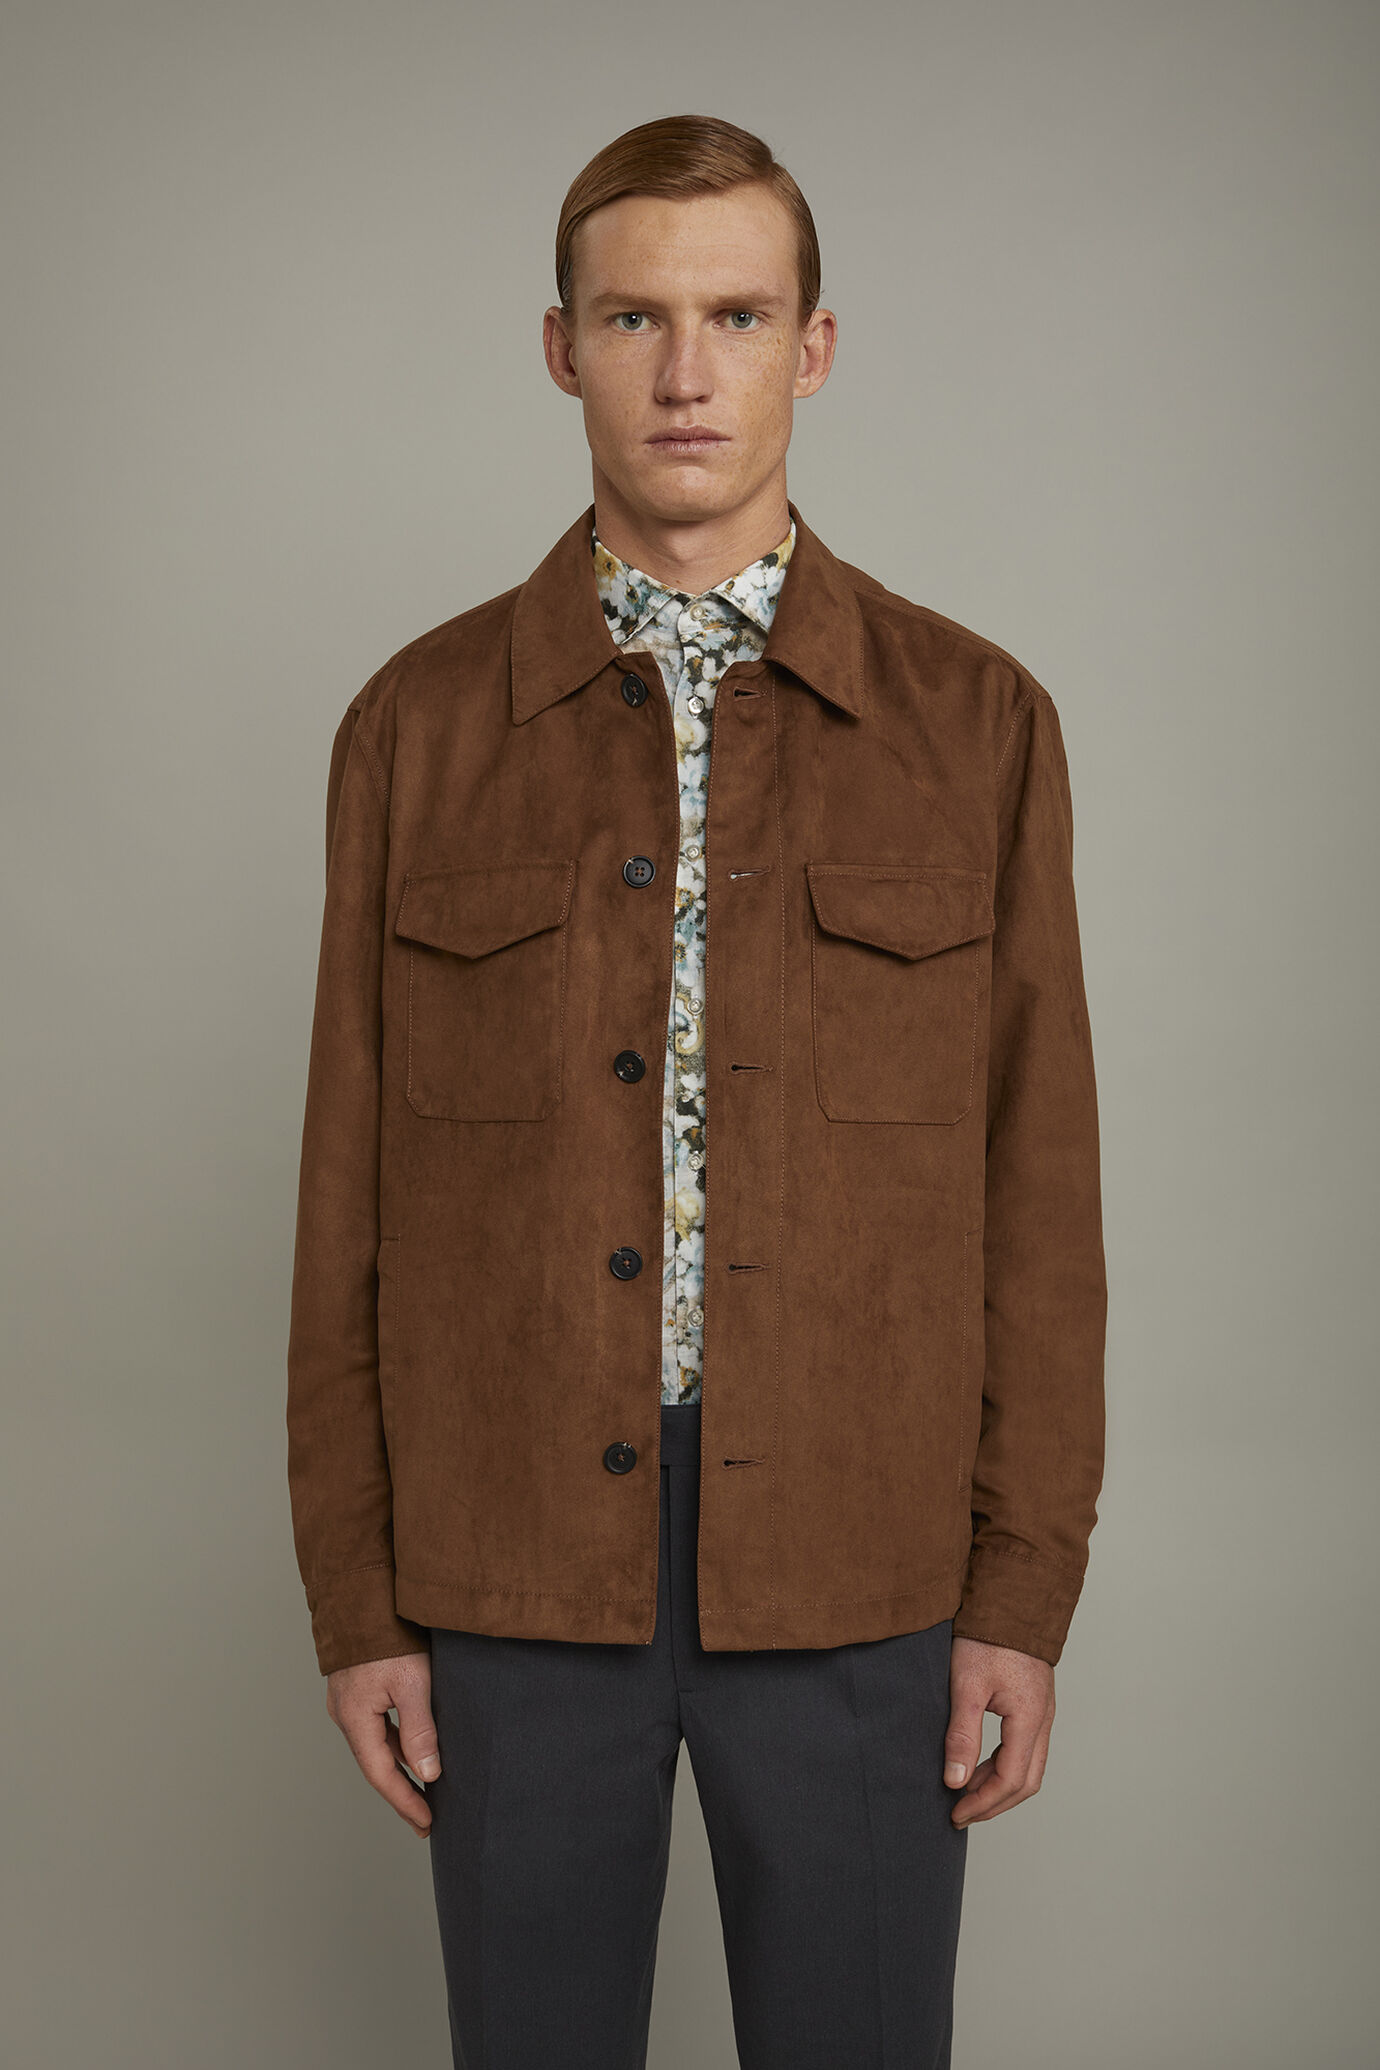 Men's jacket with suede-like fabric regular fit image number 2